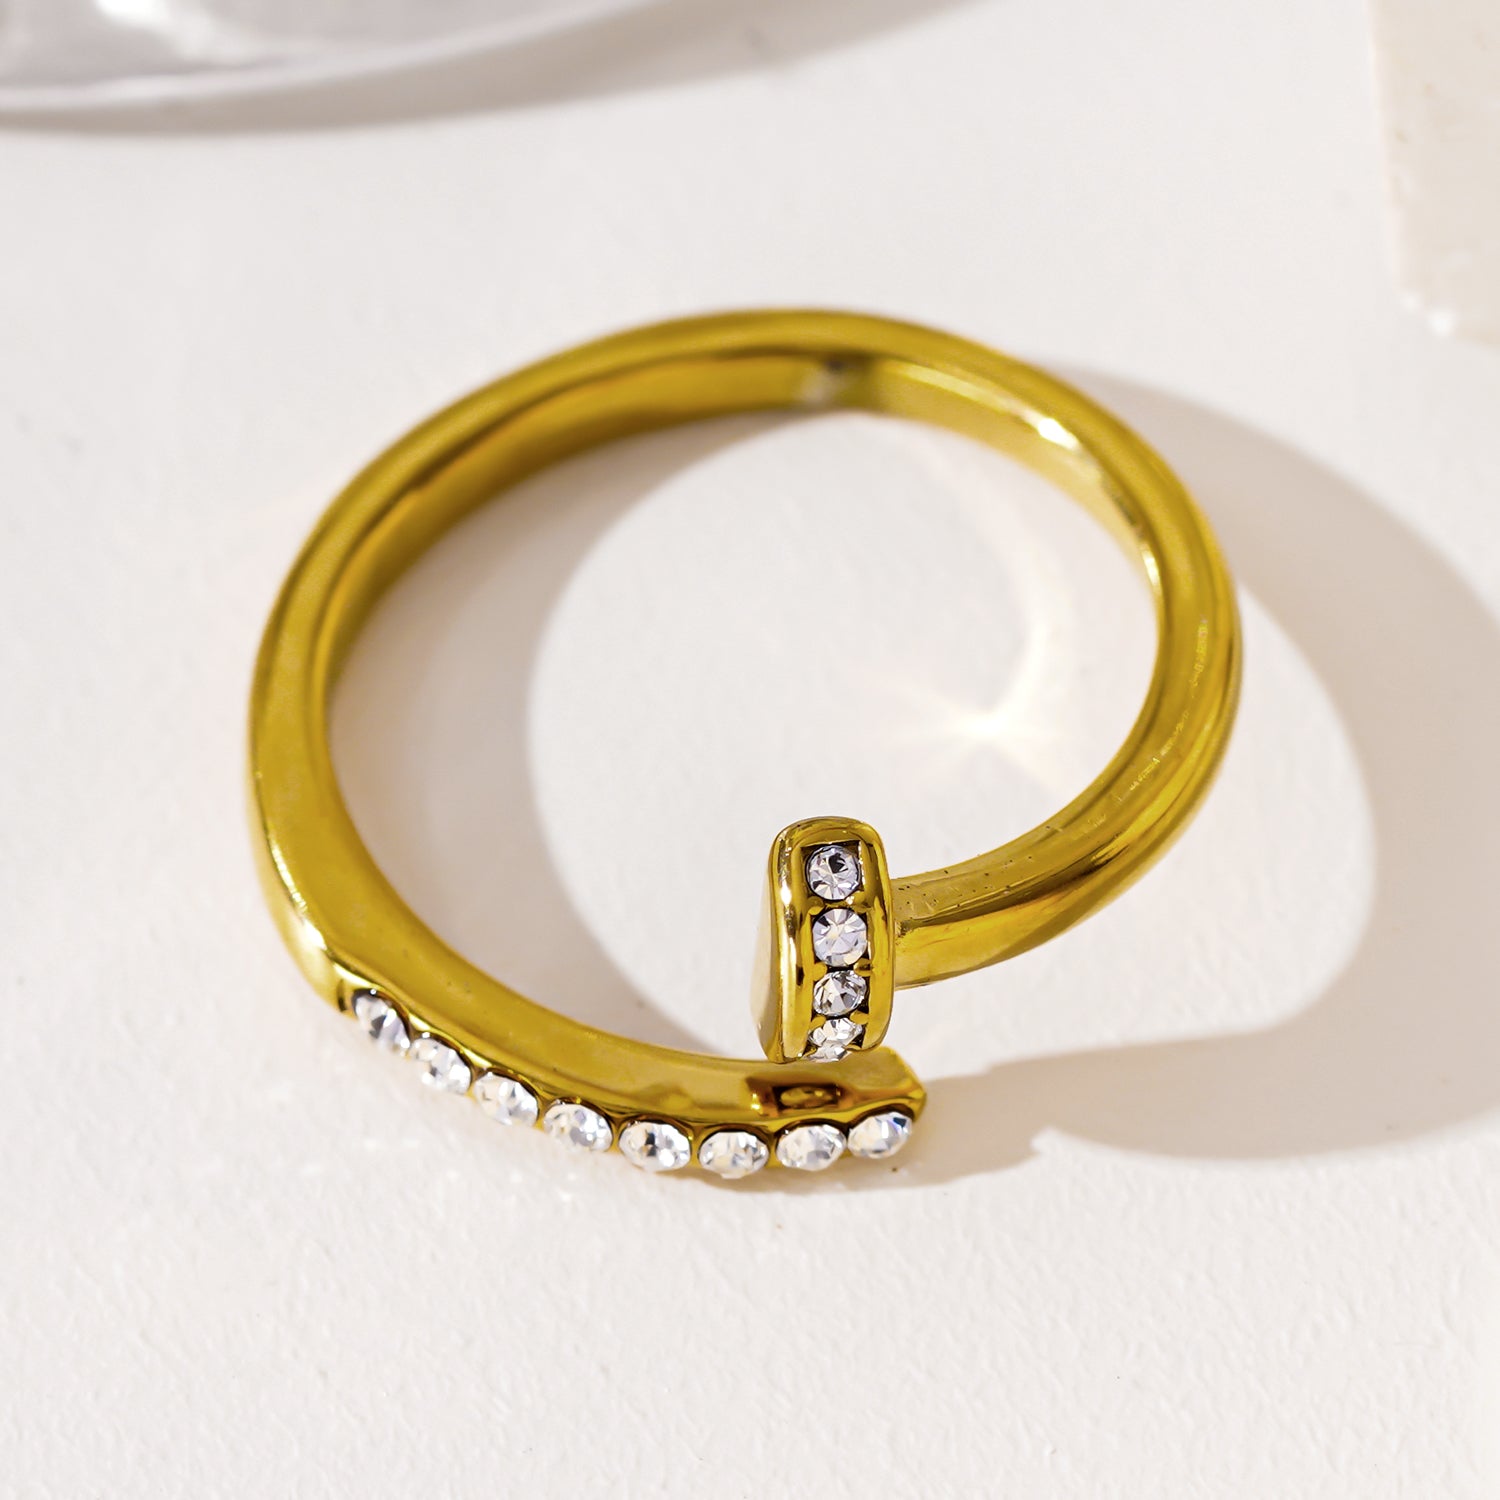 Style CHARISSE 4263: Industrial-Chic Twisted Nail Ring with Pavé Zirconia Embellishments